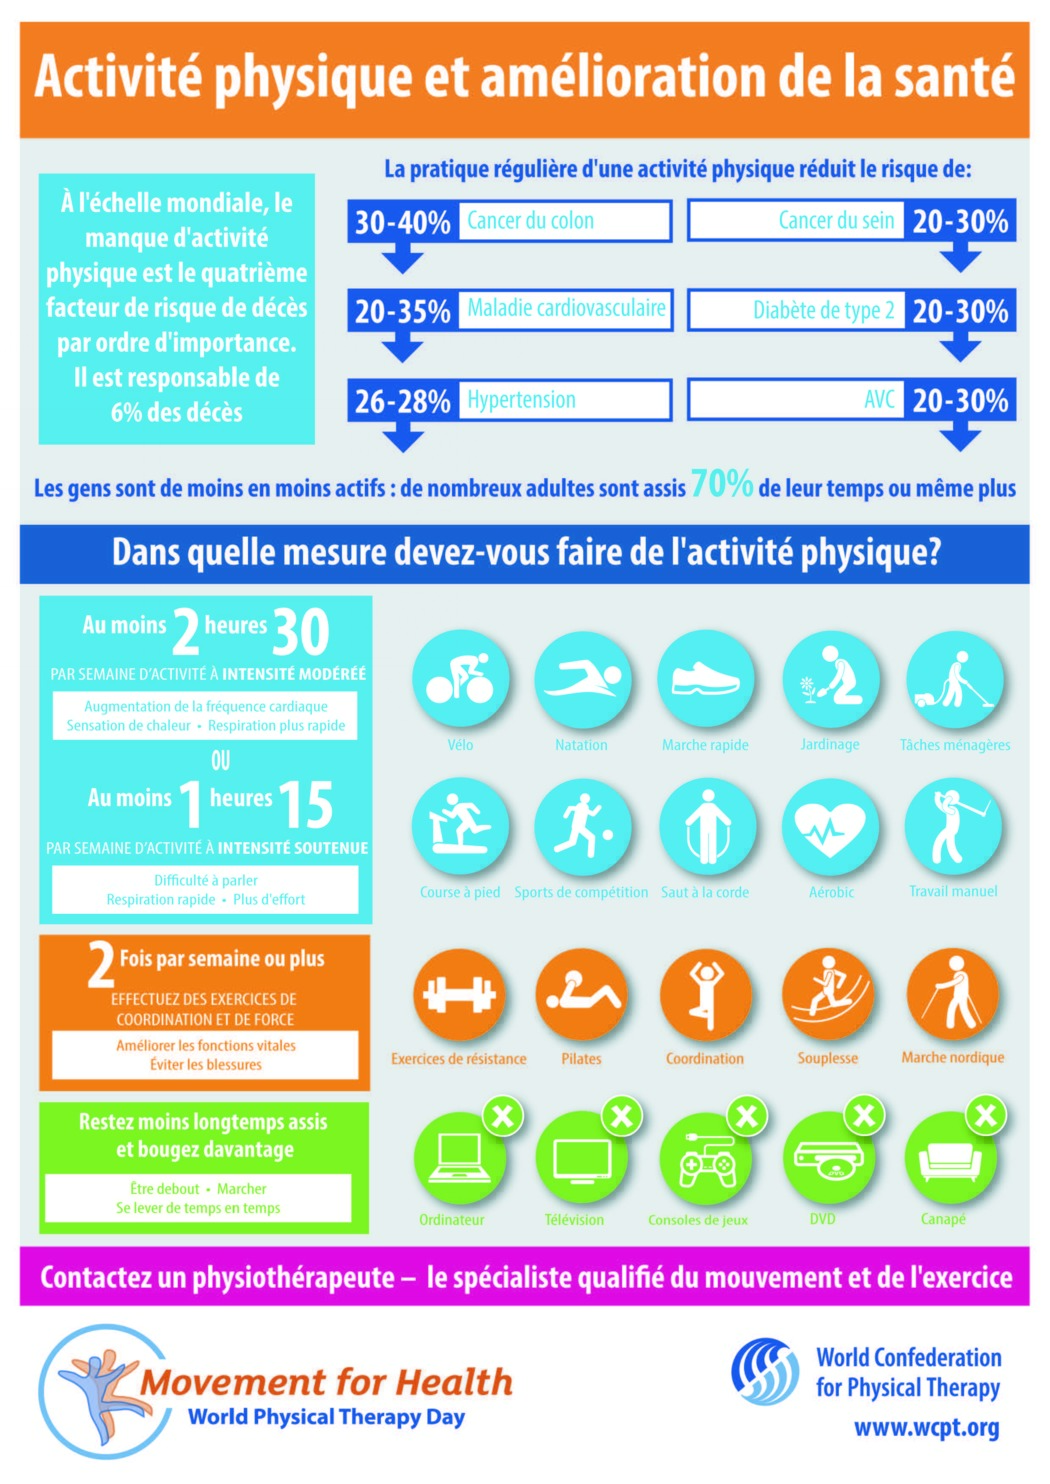 PhysicalActivityAndImprovingHealth_infographic_A4_FINAL_French.jpg